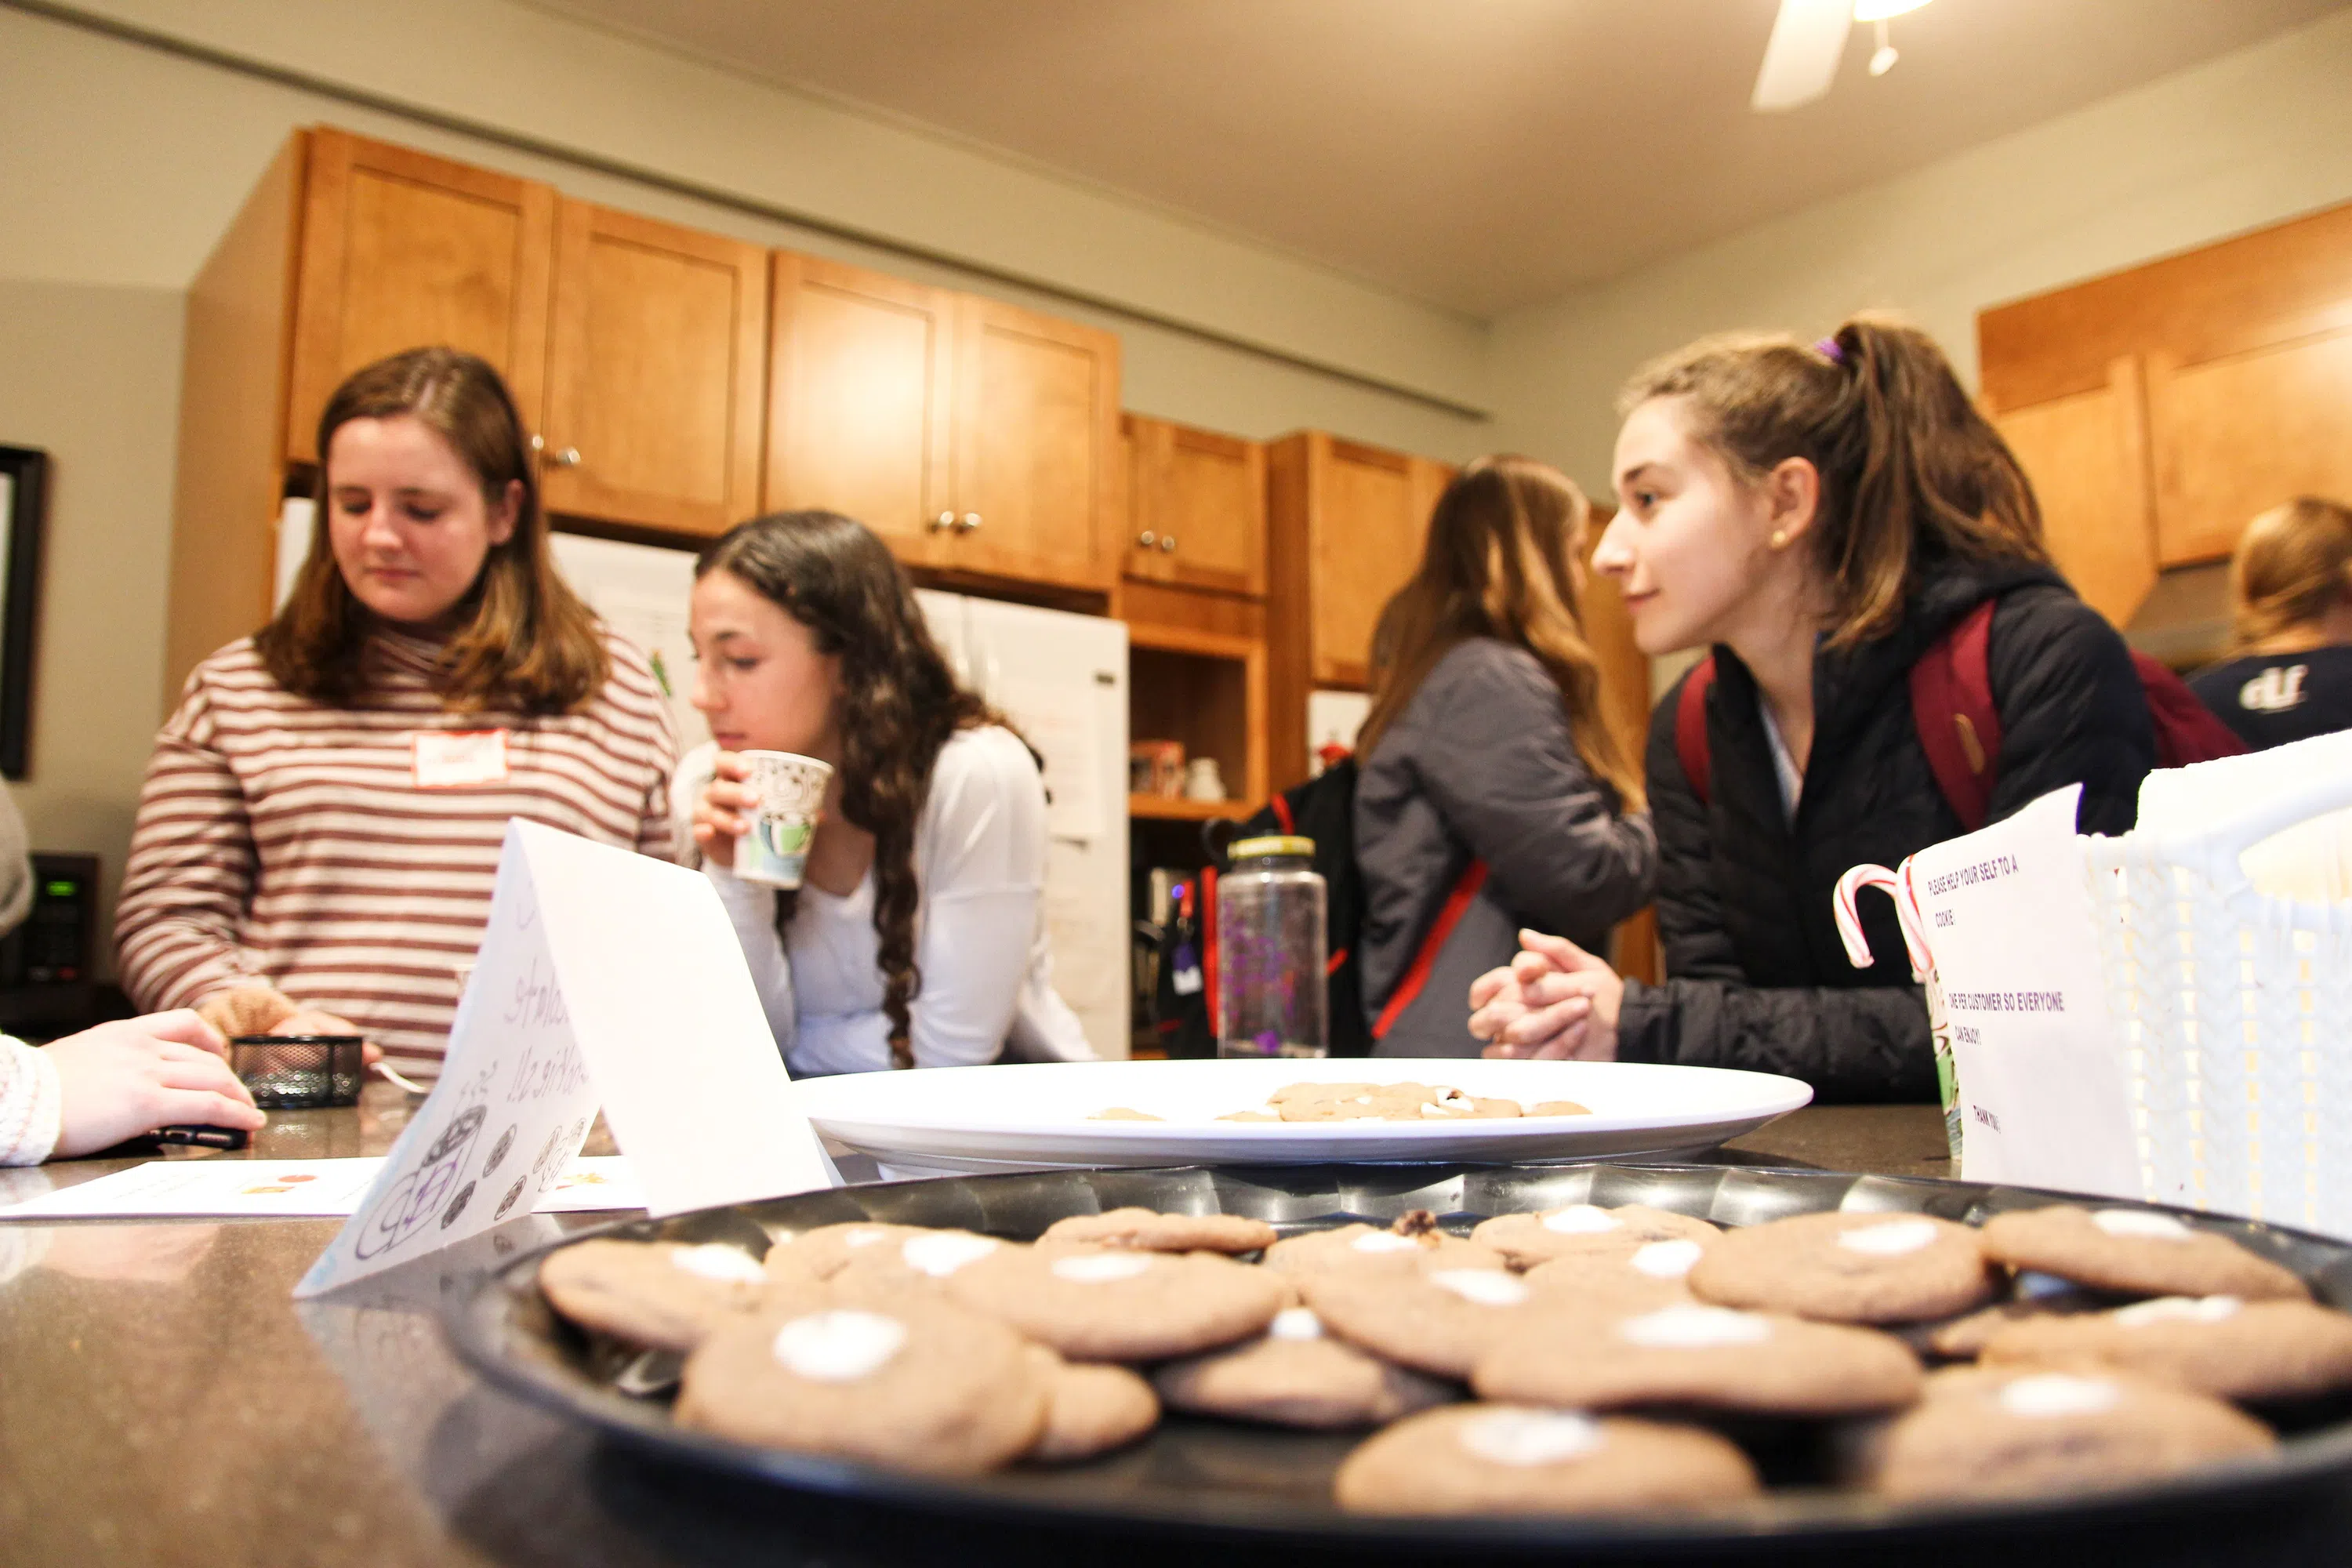 Students hang out in kitchen baking cookies.